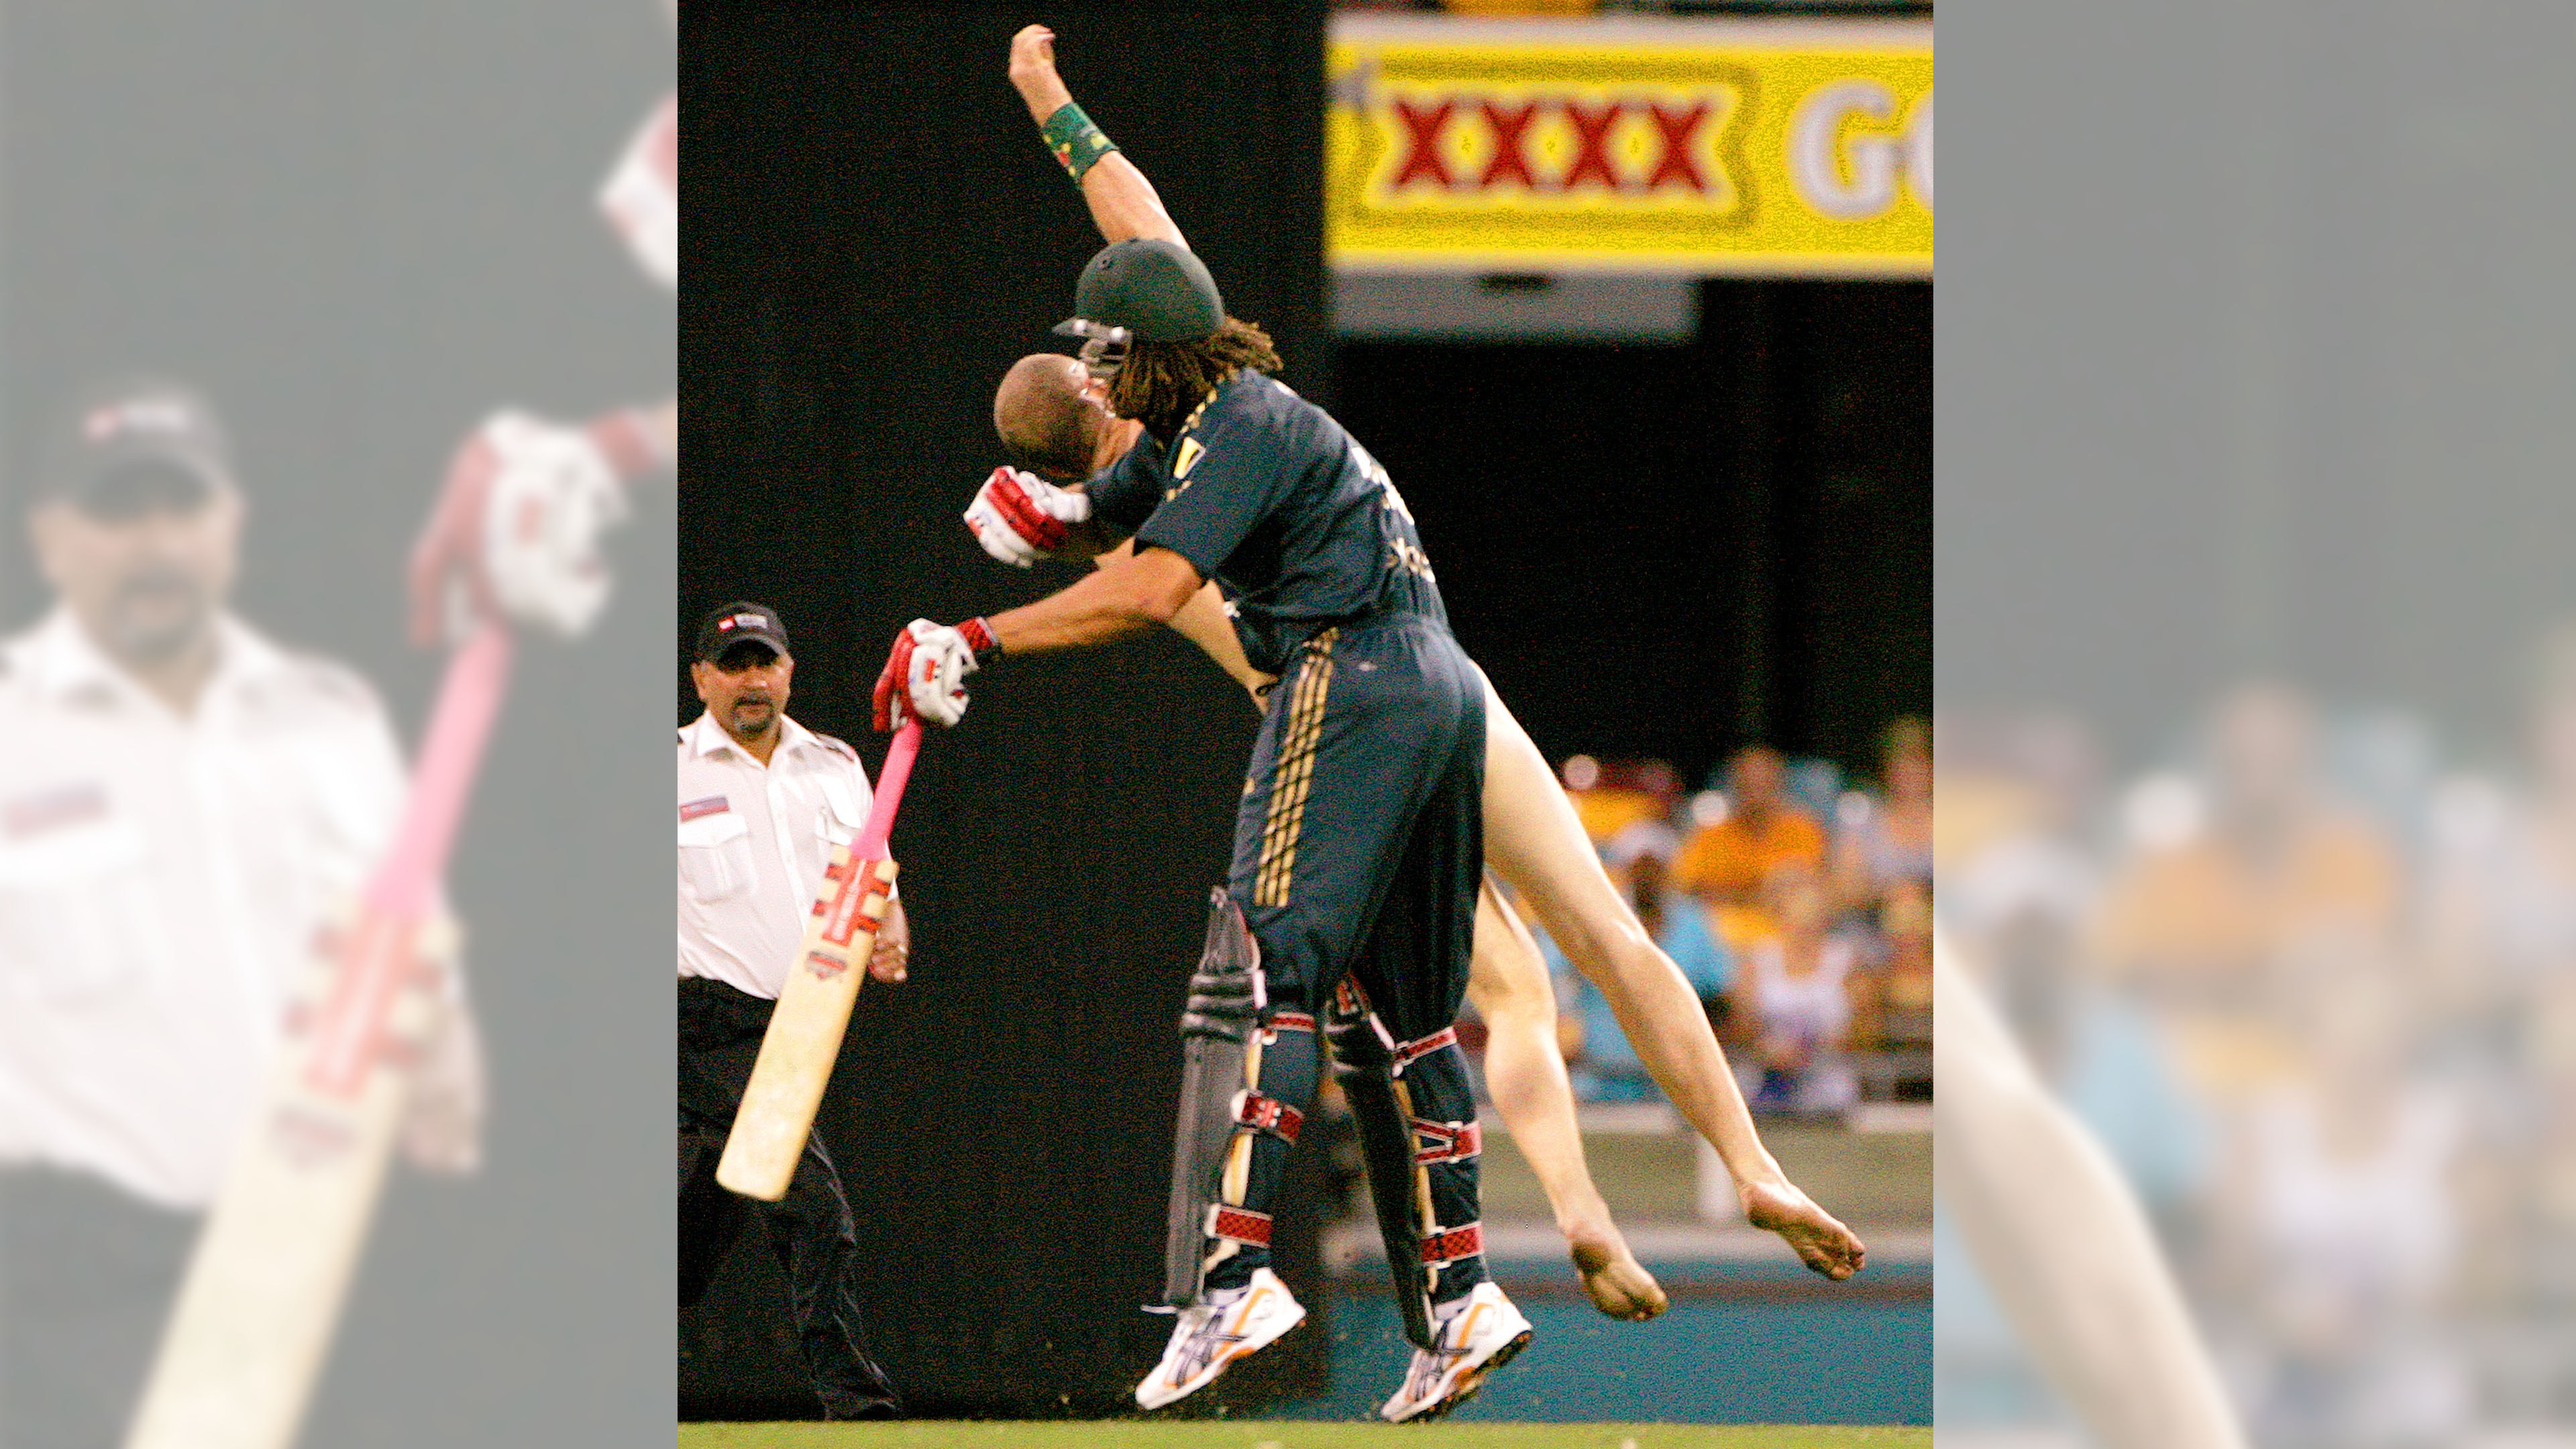 Australian cricketer Andrew Symonds shoulder charges naked spectator in 2008.